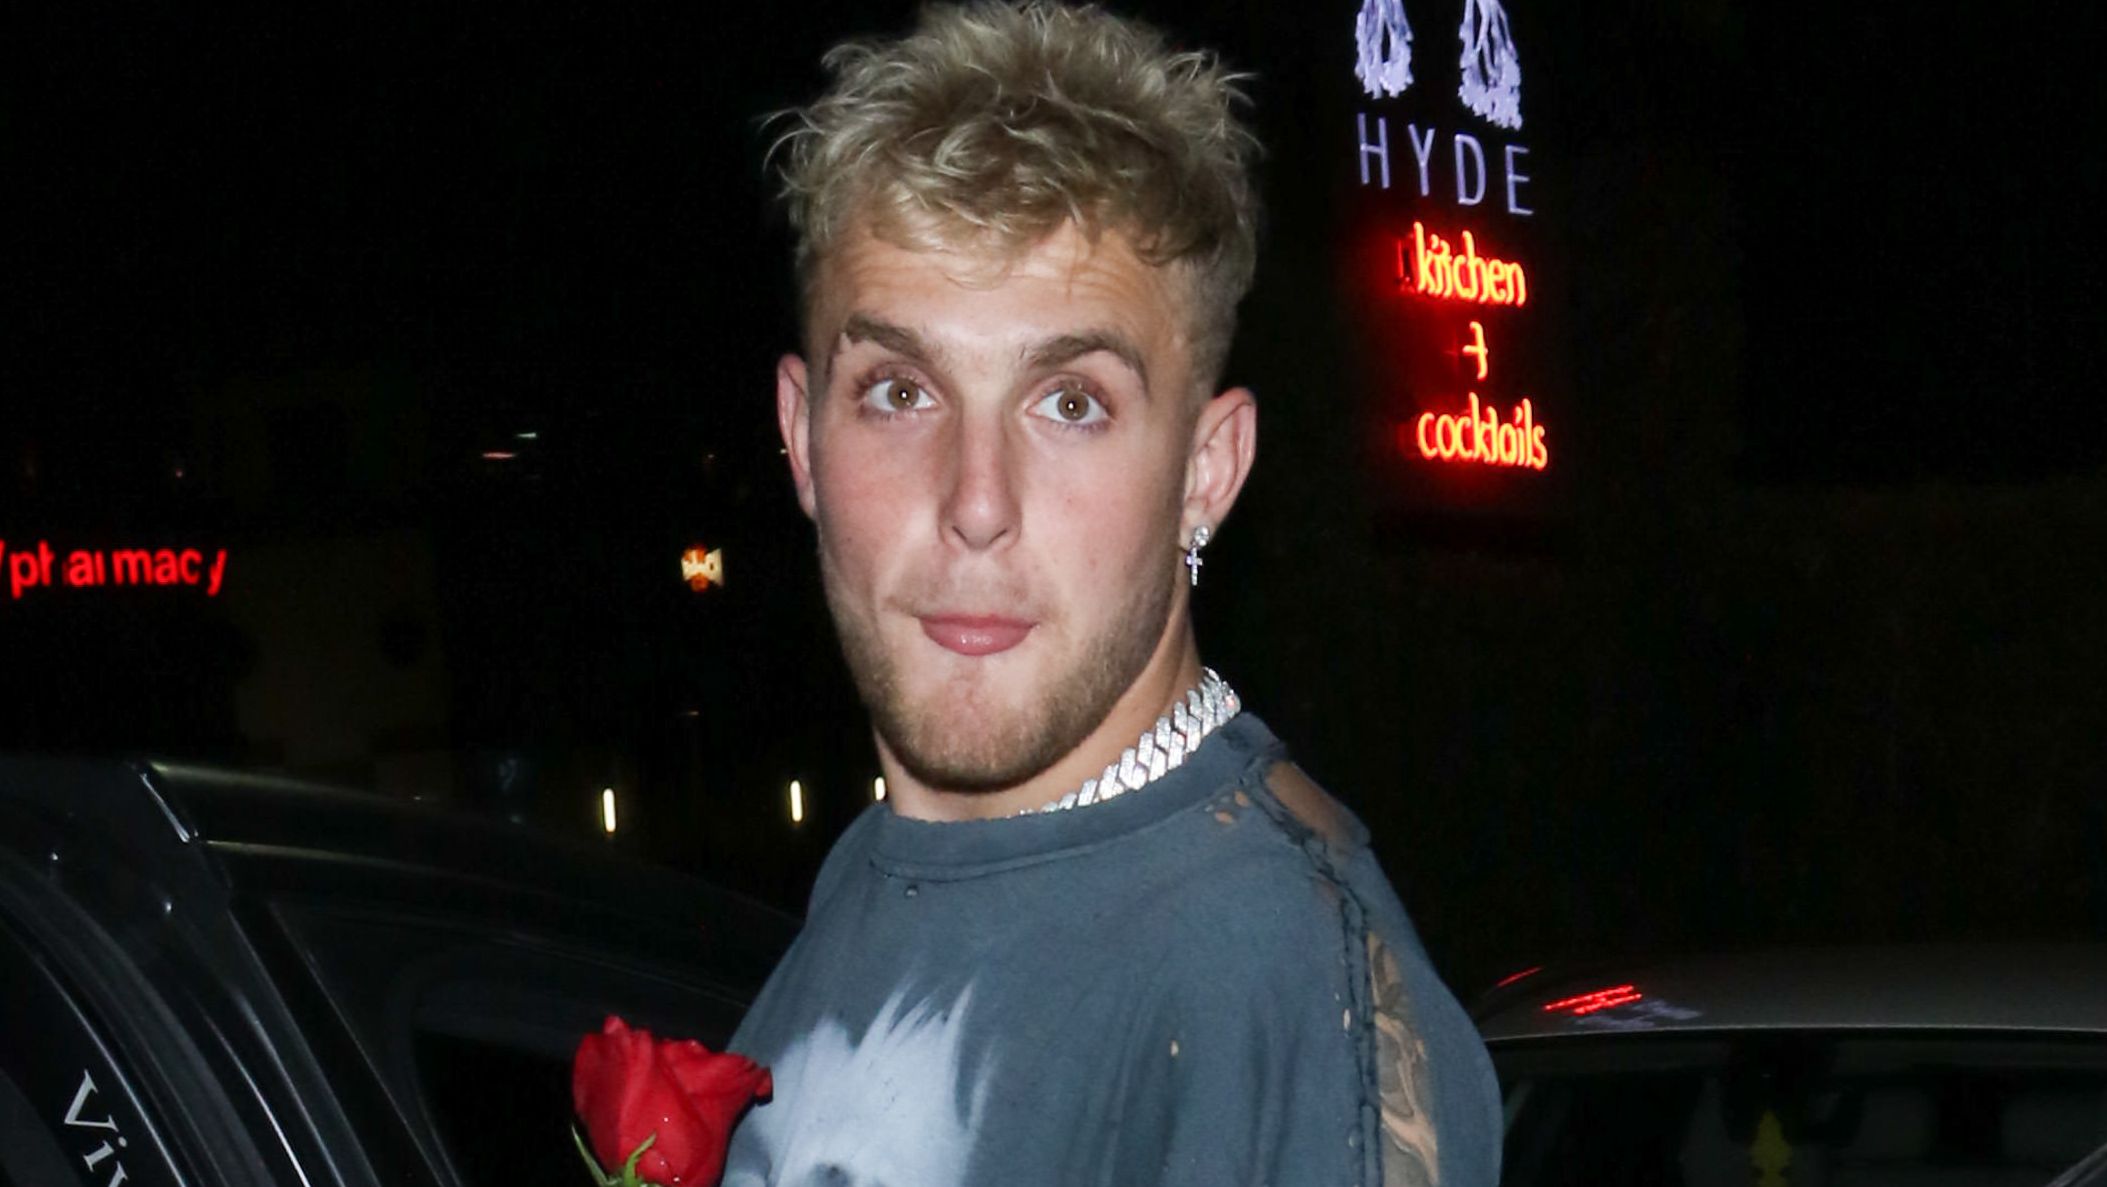 Youtuber Jake Paul S House Raided By Fbi After Facing Heat For.